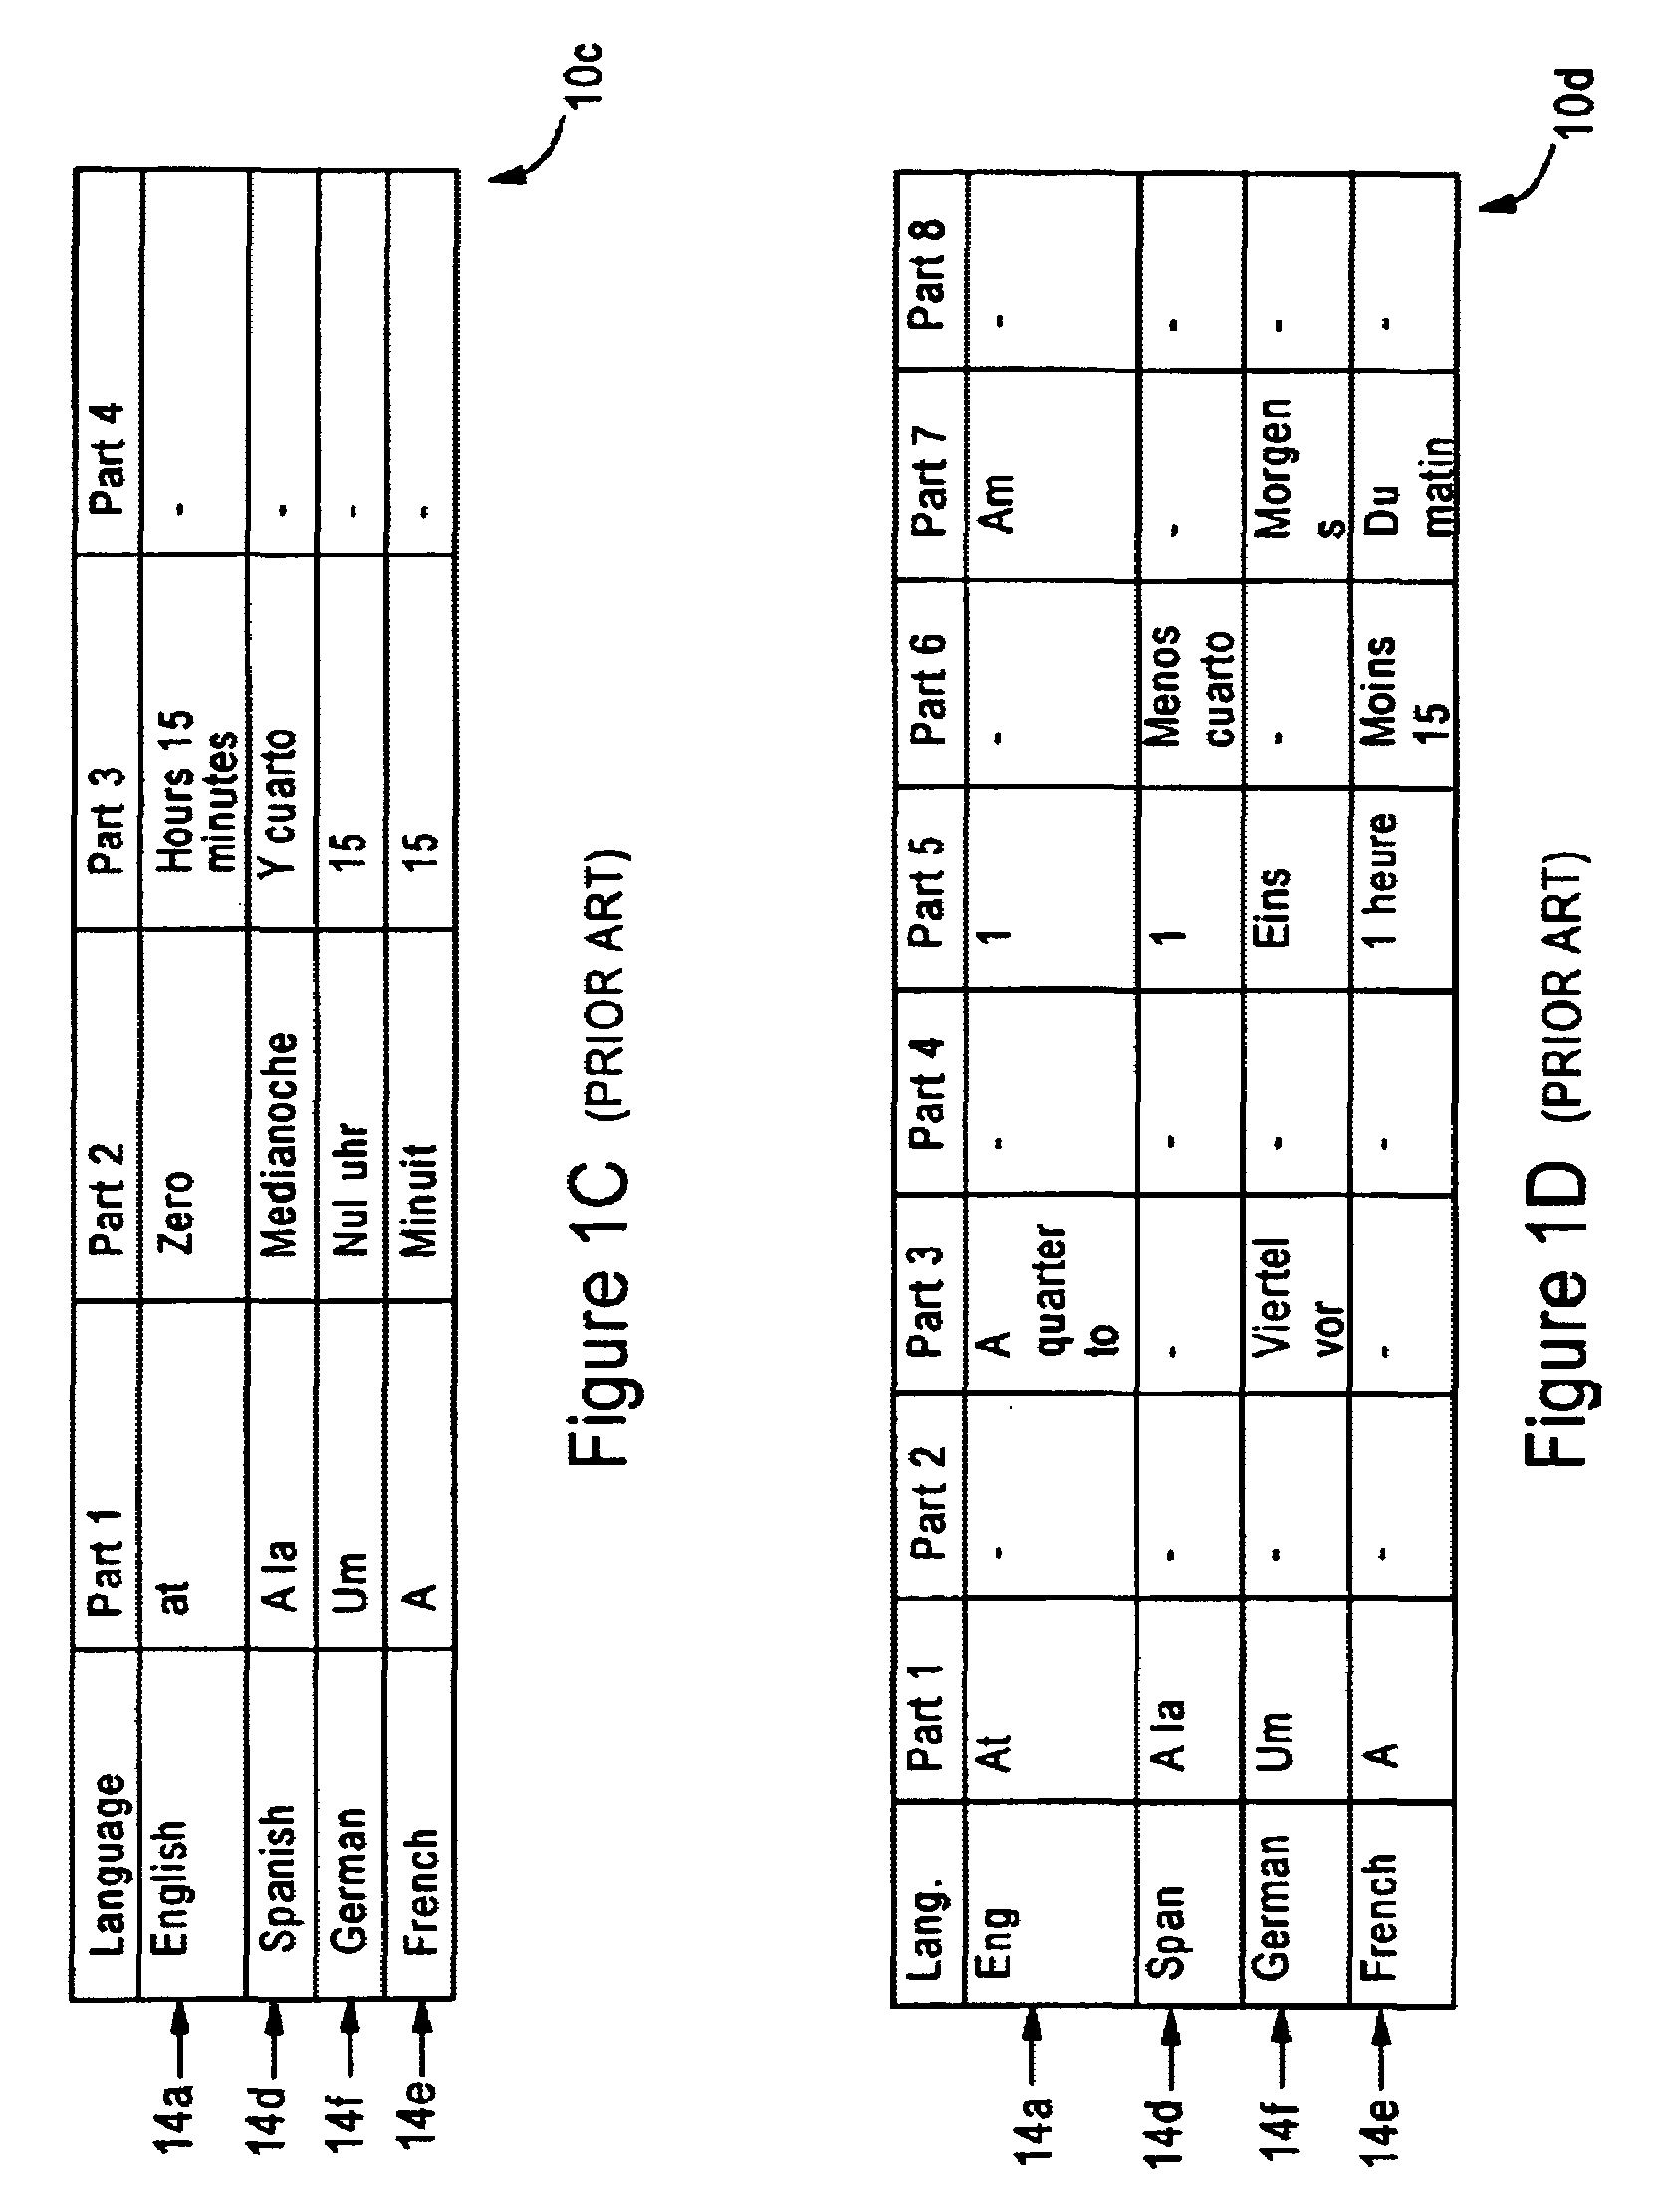 Arrangement for providing international prompts in a unified messaging system